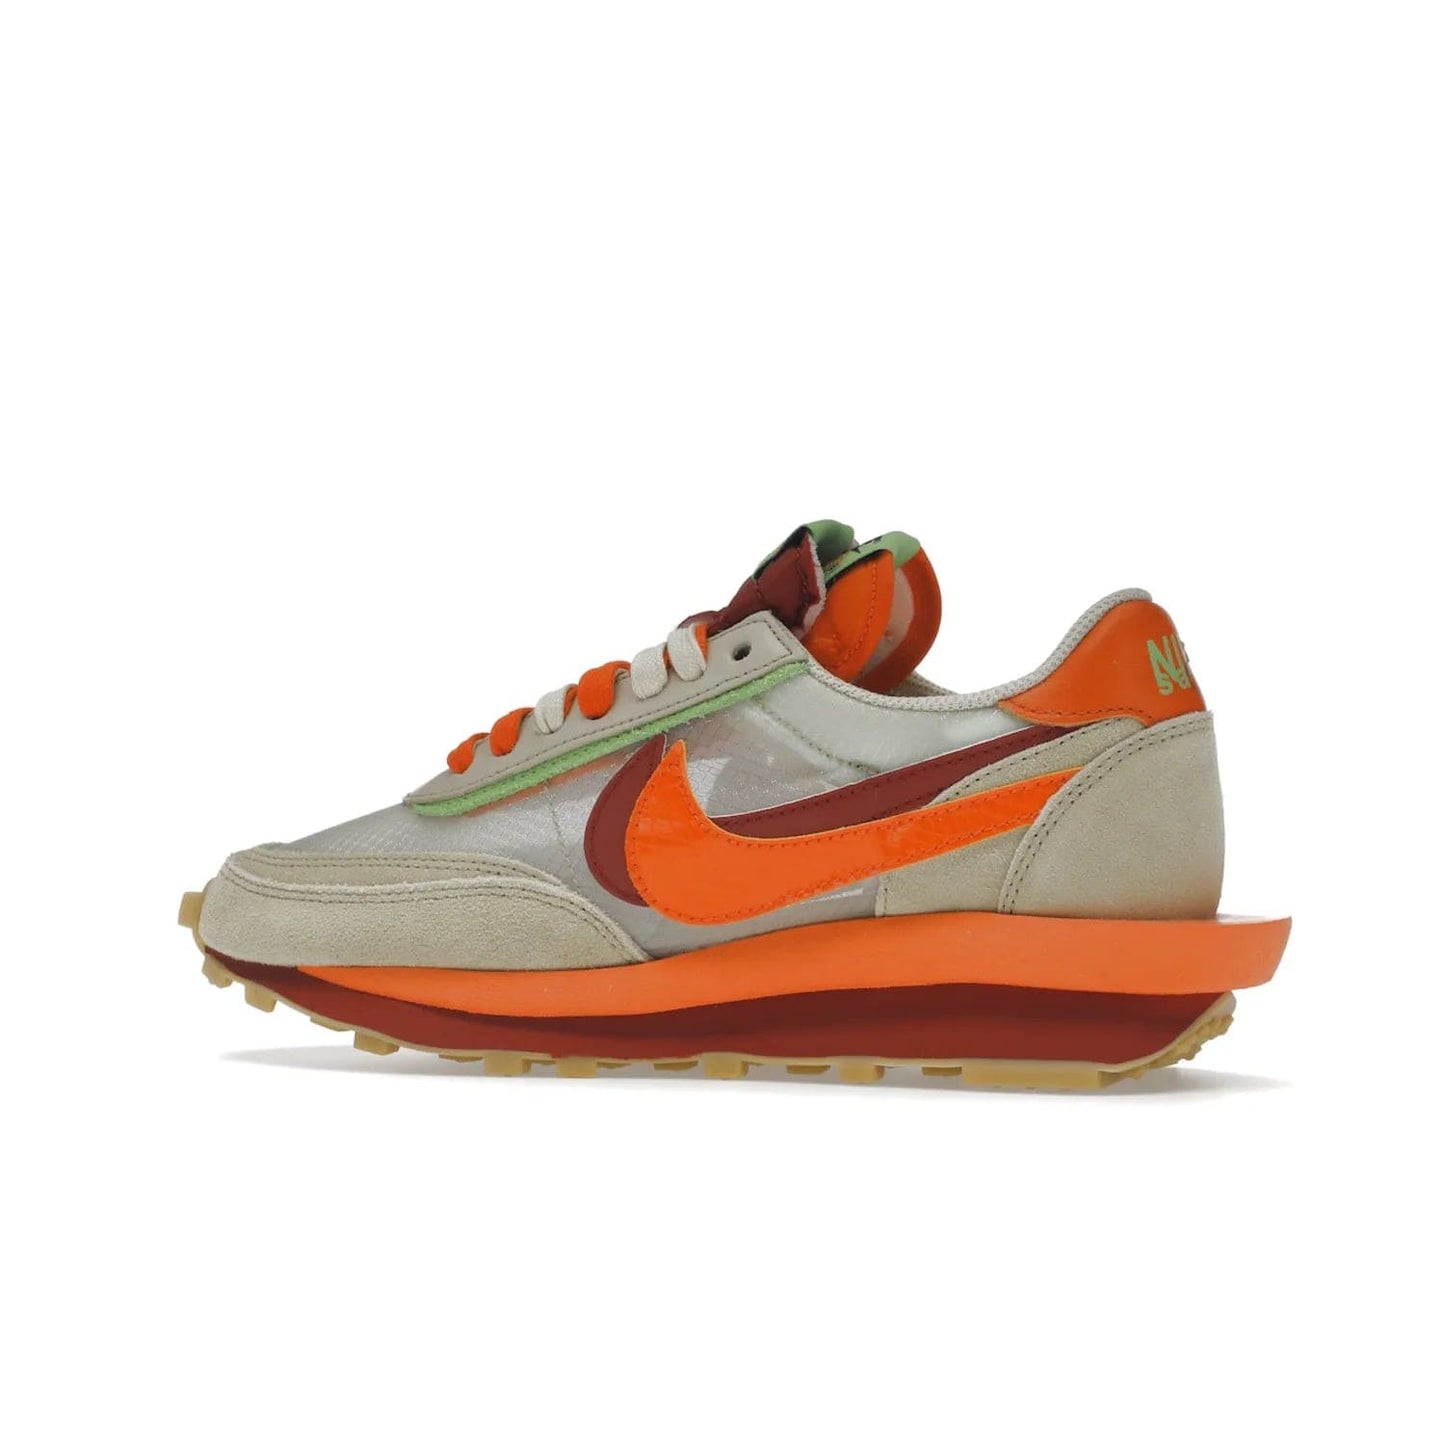 Nike LD Waffle sacai CLOT Kiss of Death Net Orange Blaze - Image 21 - Only at www.BallersClubKickz.com - A bold and stylish Nike LD Waffle sacai CLOT Kiss of Death Net Orange Blaze sneaker featuring a unique off-white, Deep Red & Orange Blaze Swooshes, two-toned stacked sole and doubled tongue. Available in September 2021. Make a statement.